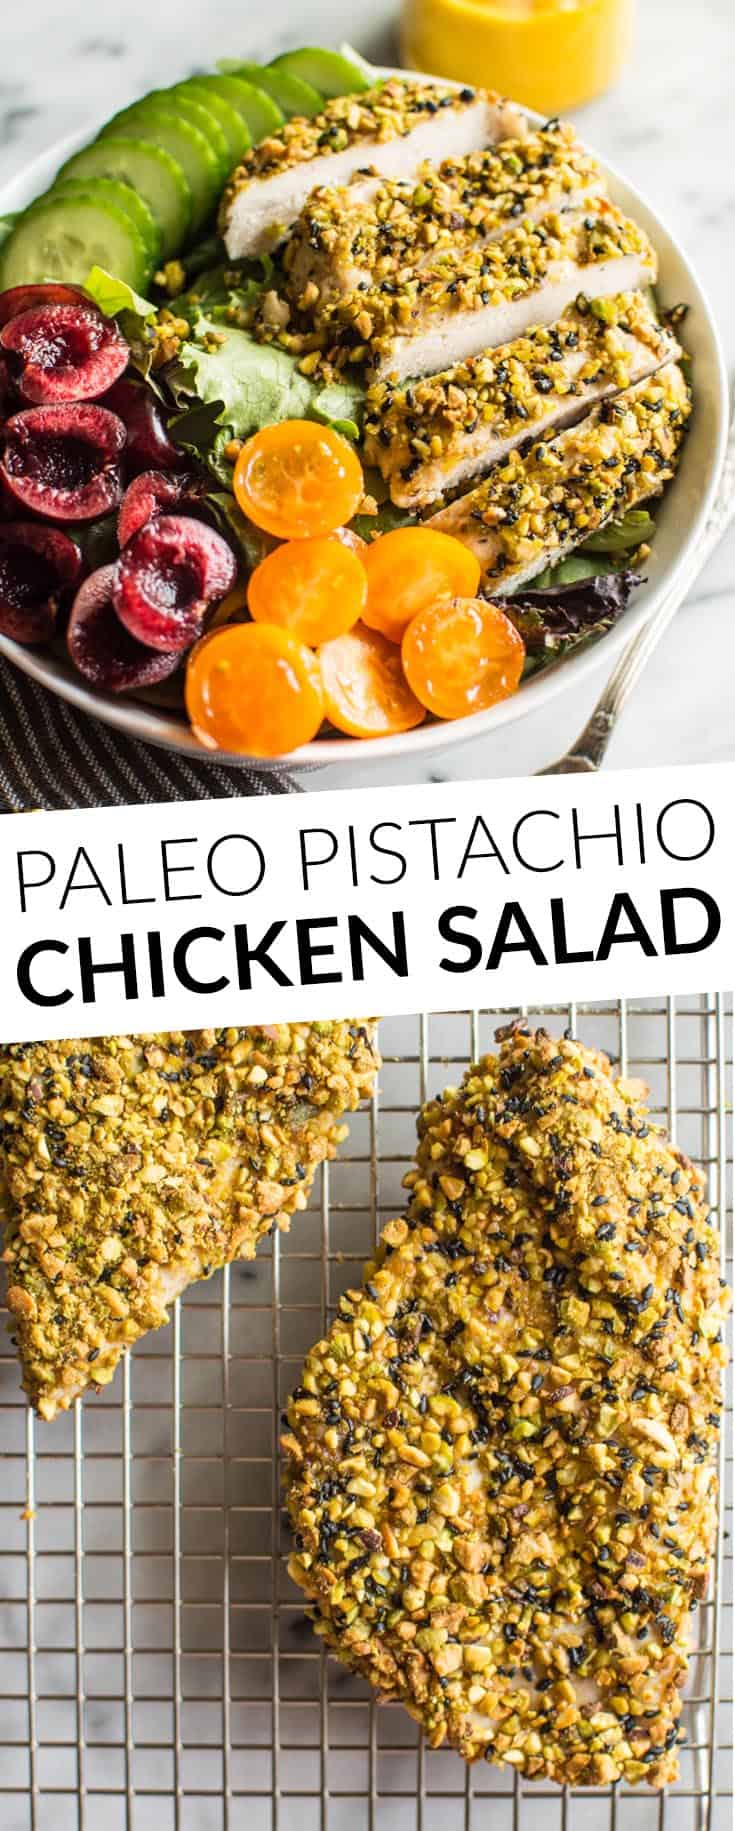 Pistachio Crusted Chicken Salad with Carrot Ginger Dressing - this gluten-free and paleo salad is perfect for weeknights. Ready in 30 minutes! @healthynibs